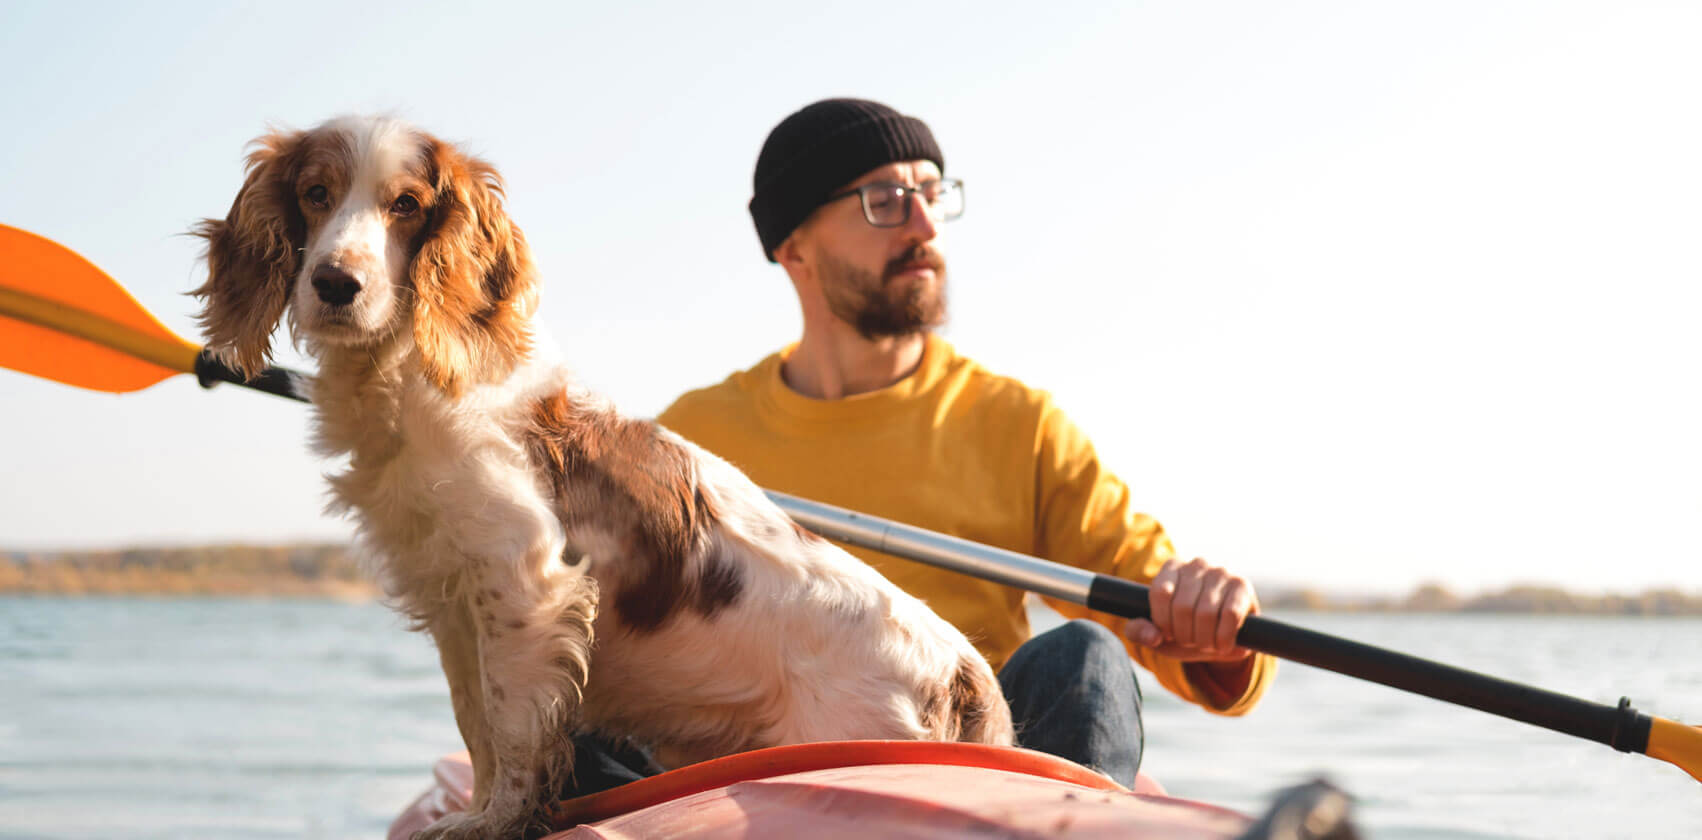 Make a splash: Safely swim, boat, and play in the water with your dog - Man in kayak with his pet dog